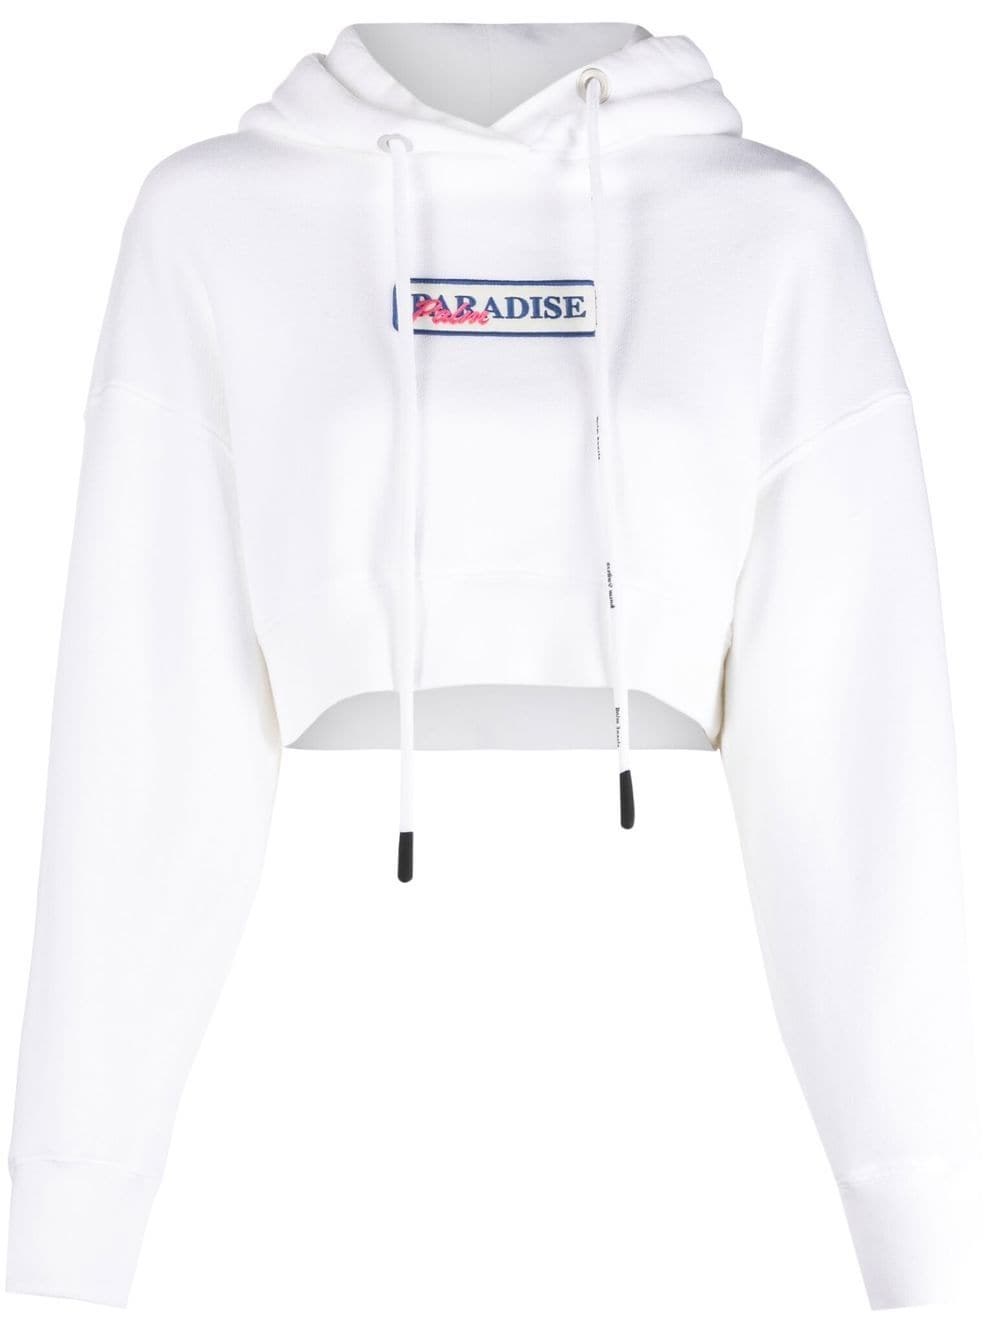 PALM ANGELS PARADISE PALM CROPPED HOODIE